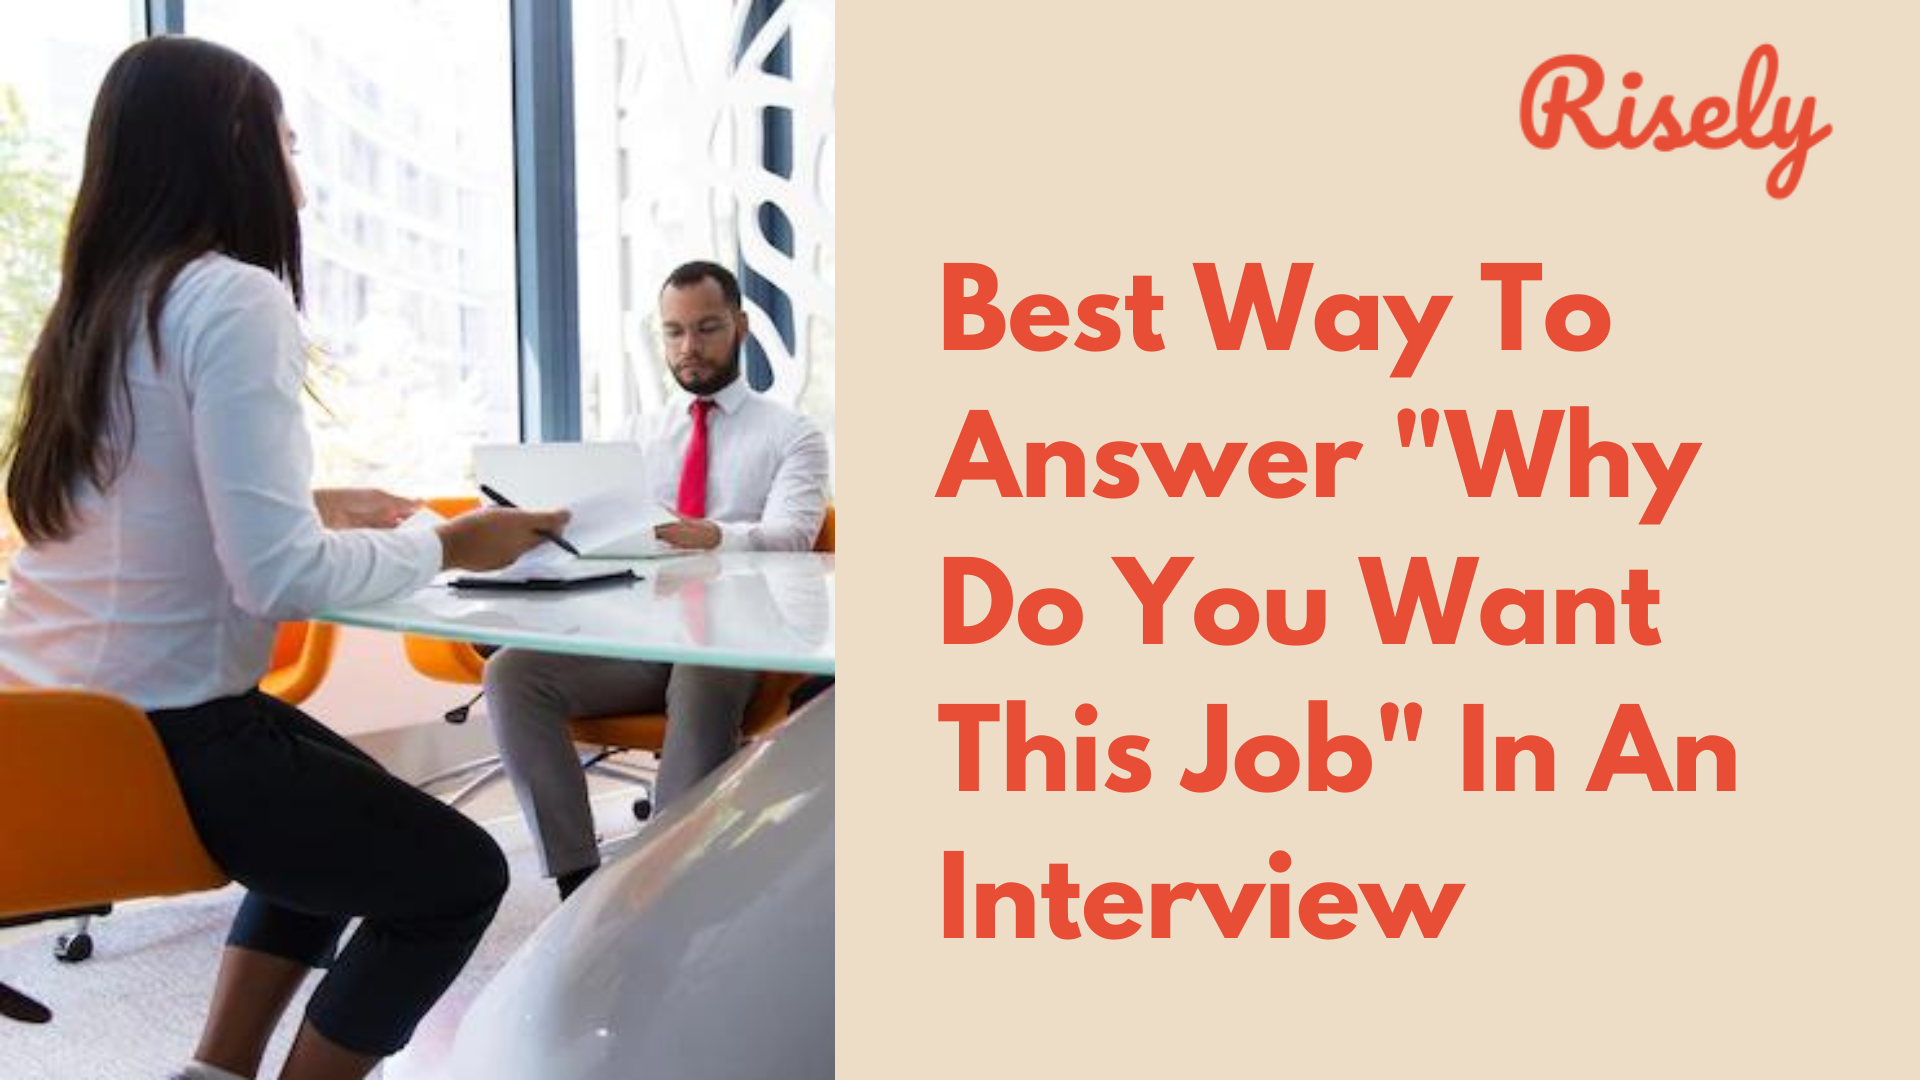 Best Way To Answer “Why Do You Want This Job” In An Interview